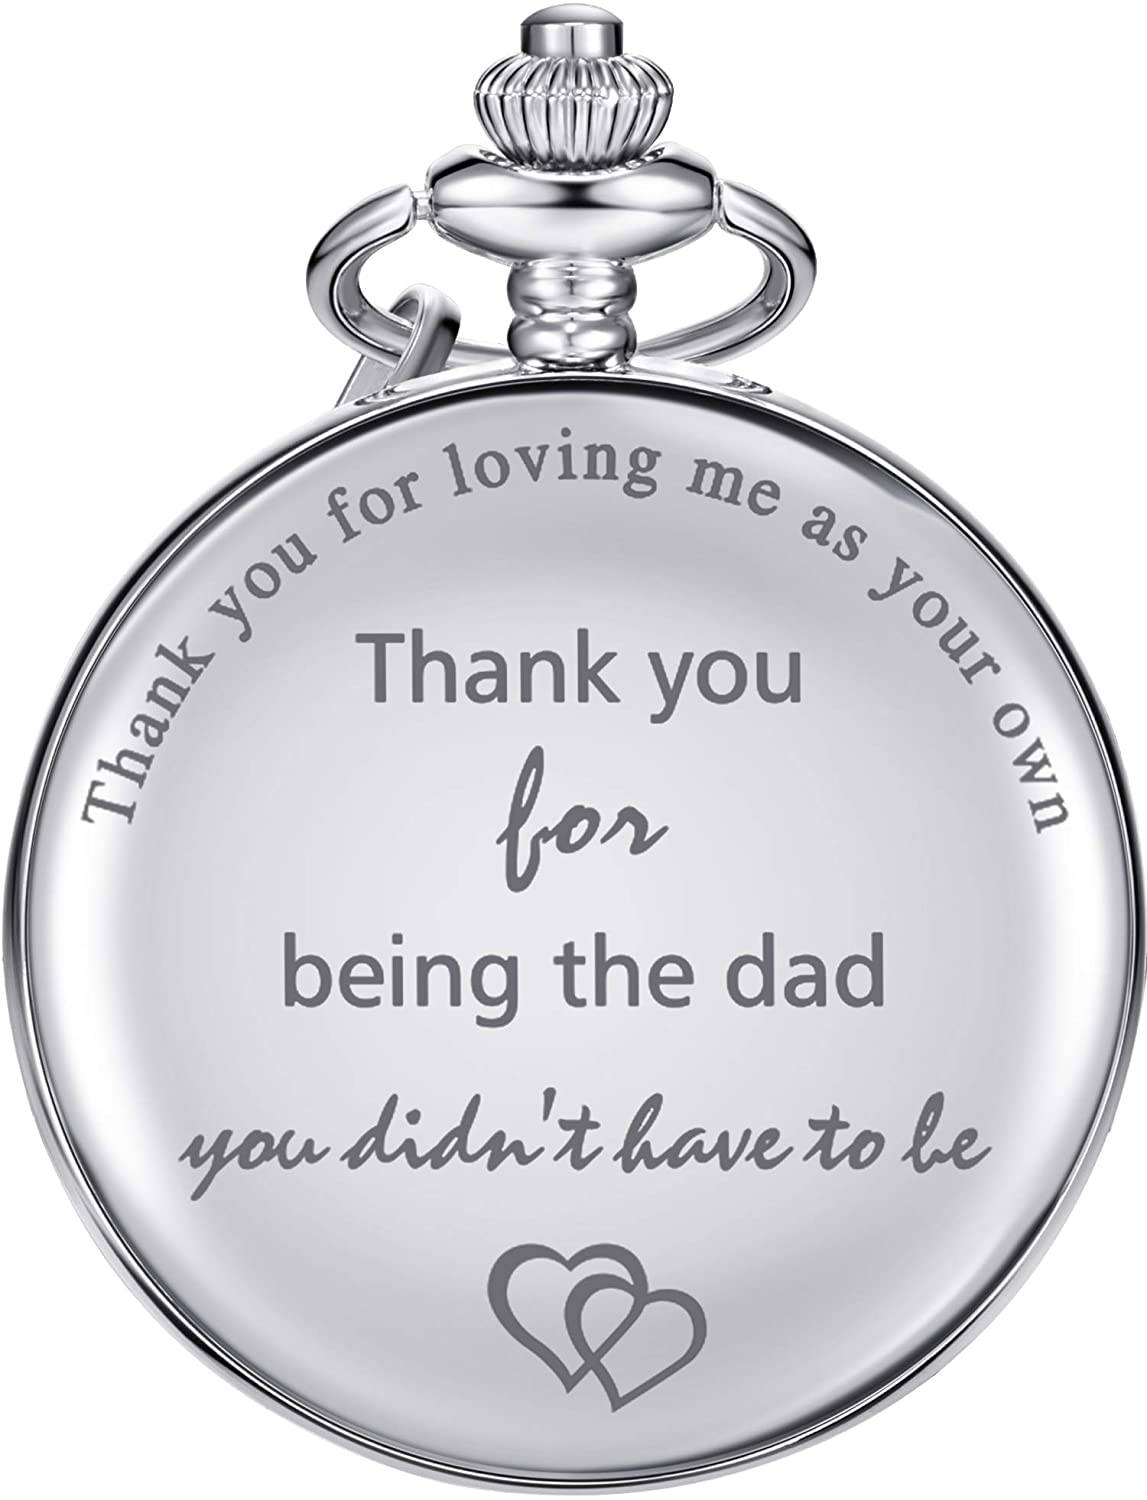 Quartz Pocket Watch Engraved with Words "Thank You for Loving Me as Your Own, Thank You for Being the Dad You Didn't Have to Be", Made of Alloy With 2 Colors White and Black